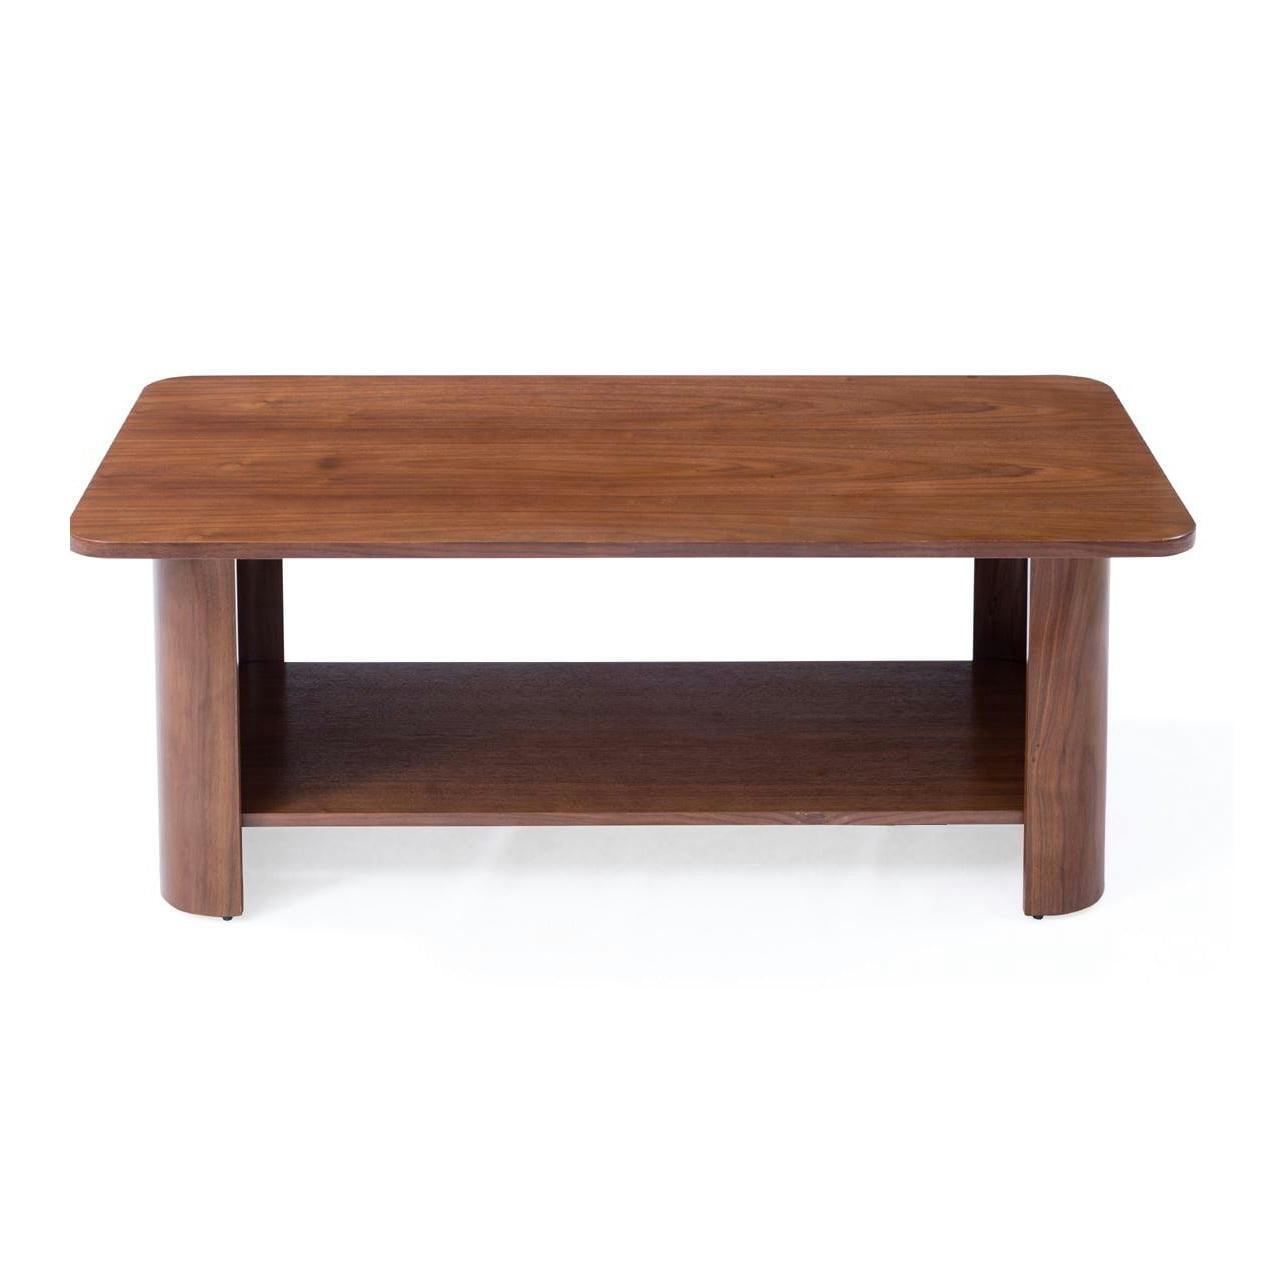 Contemporary Walnut Wood and Metal Coffee Table with Open Shelf